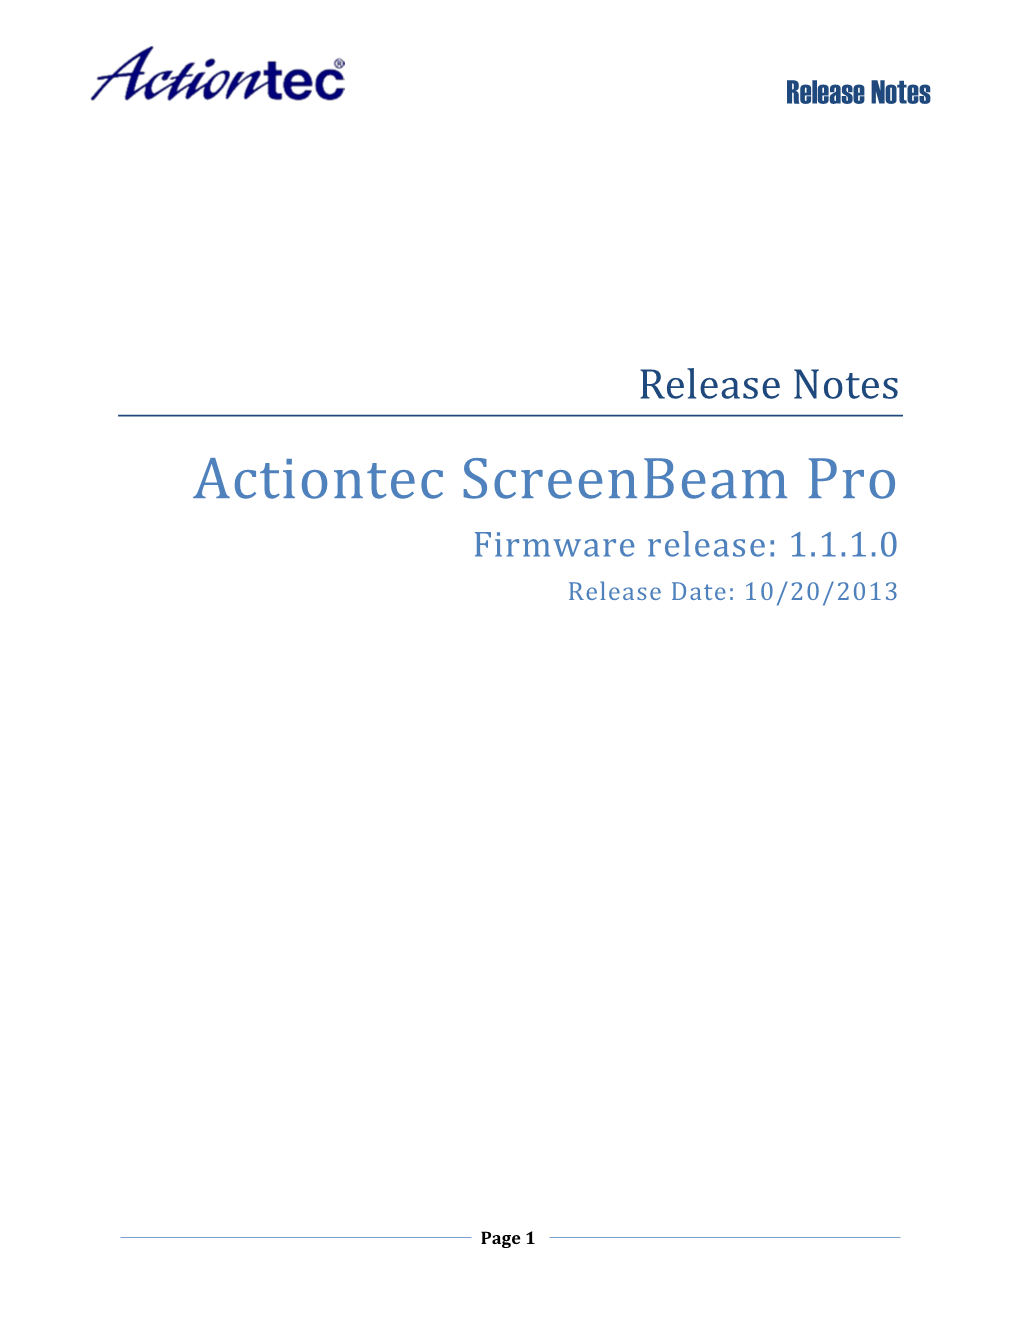 Actiontec Screenbeam Pro and the Actiontec Screenbeam Kit Software and Dongle (SBT100U)